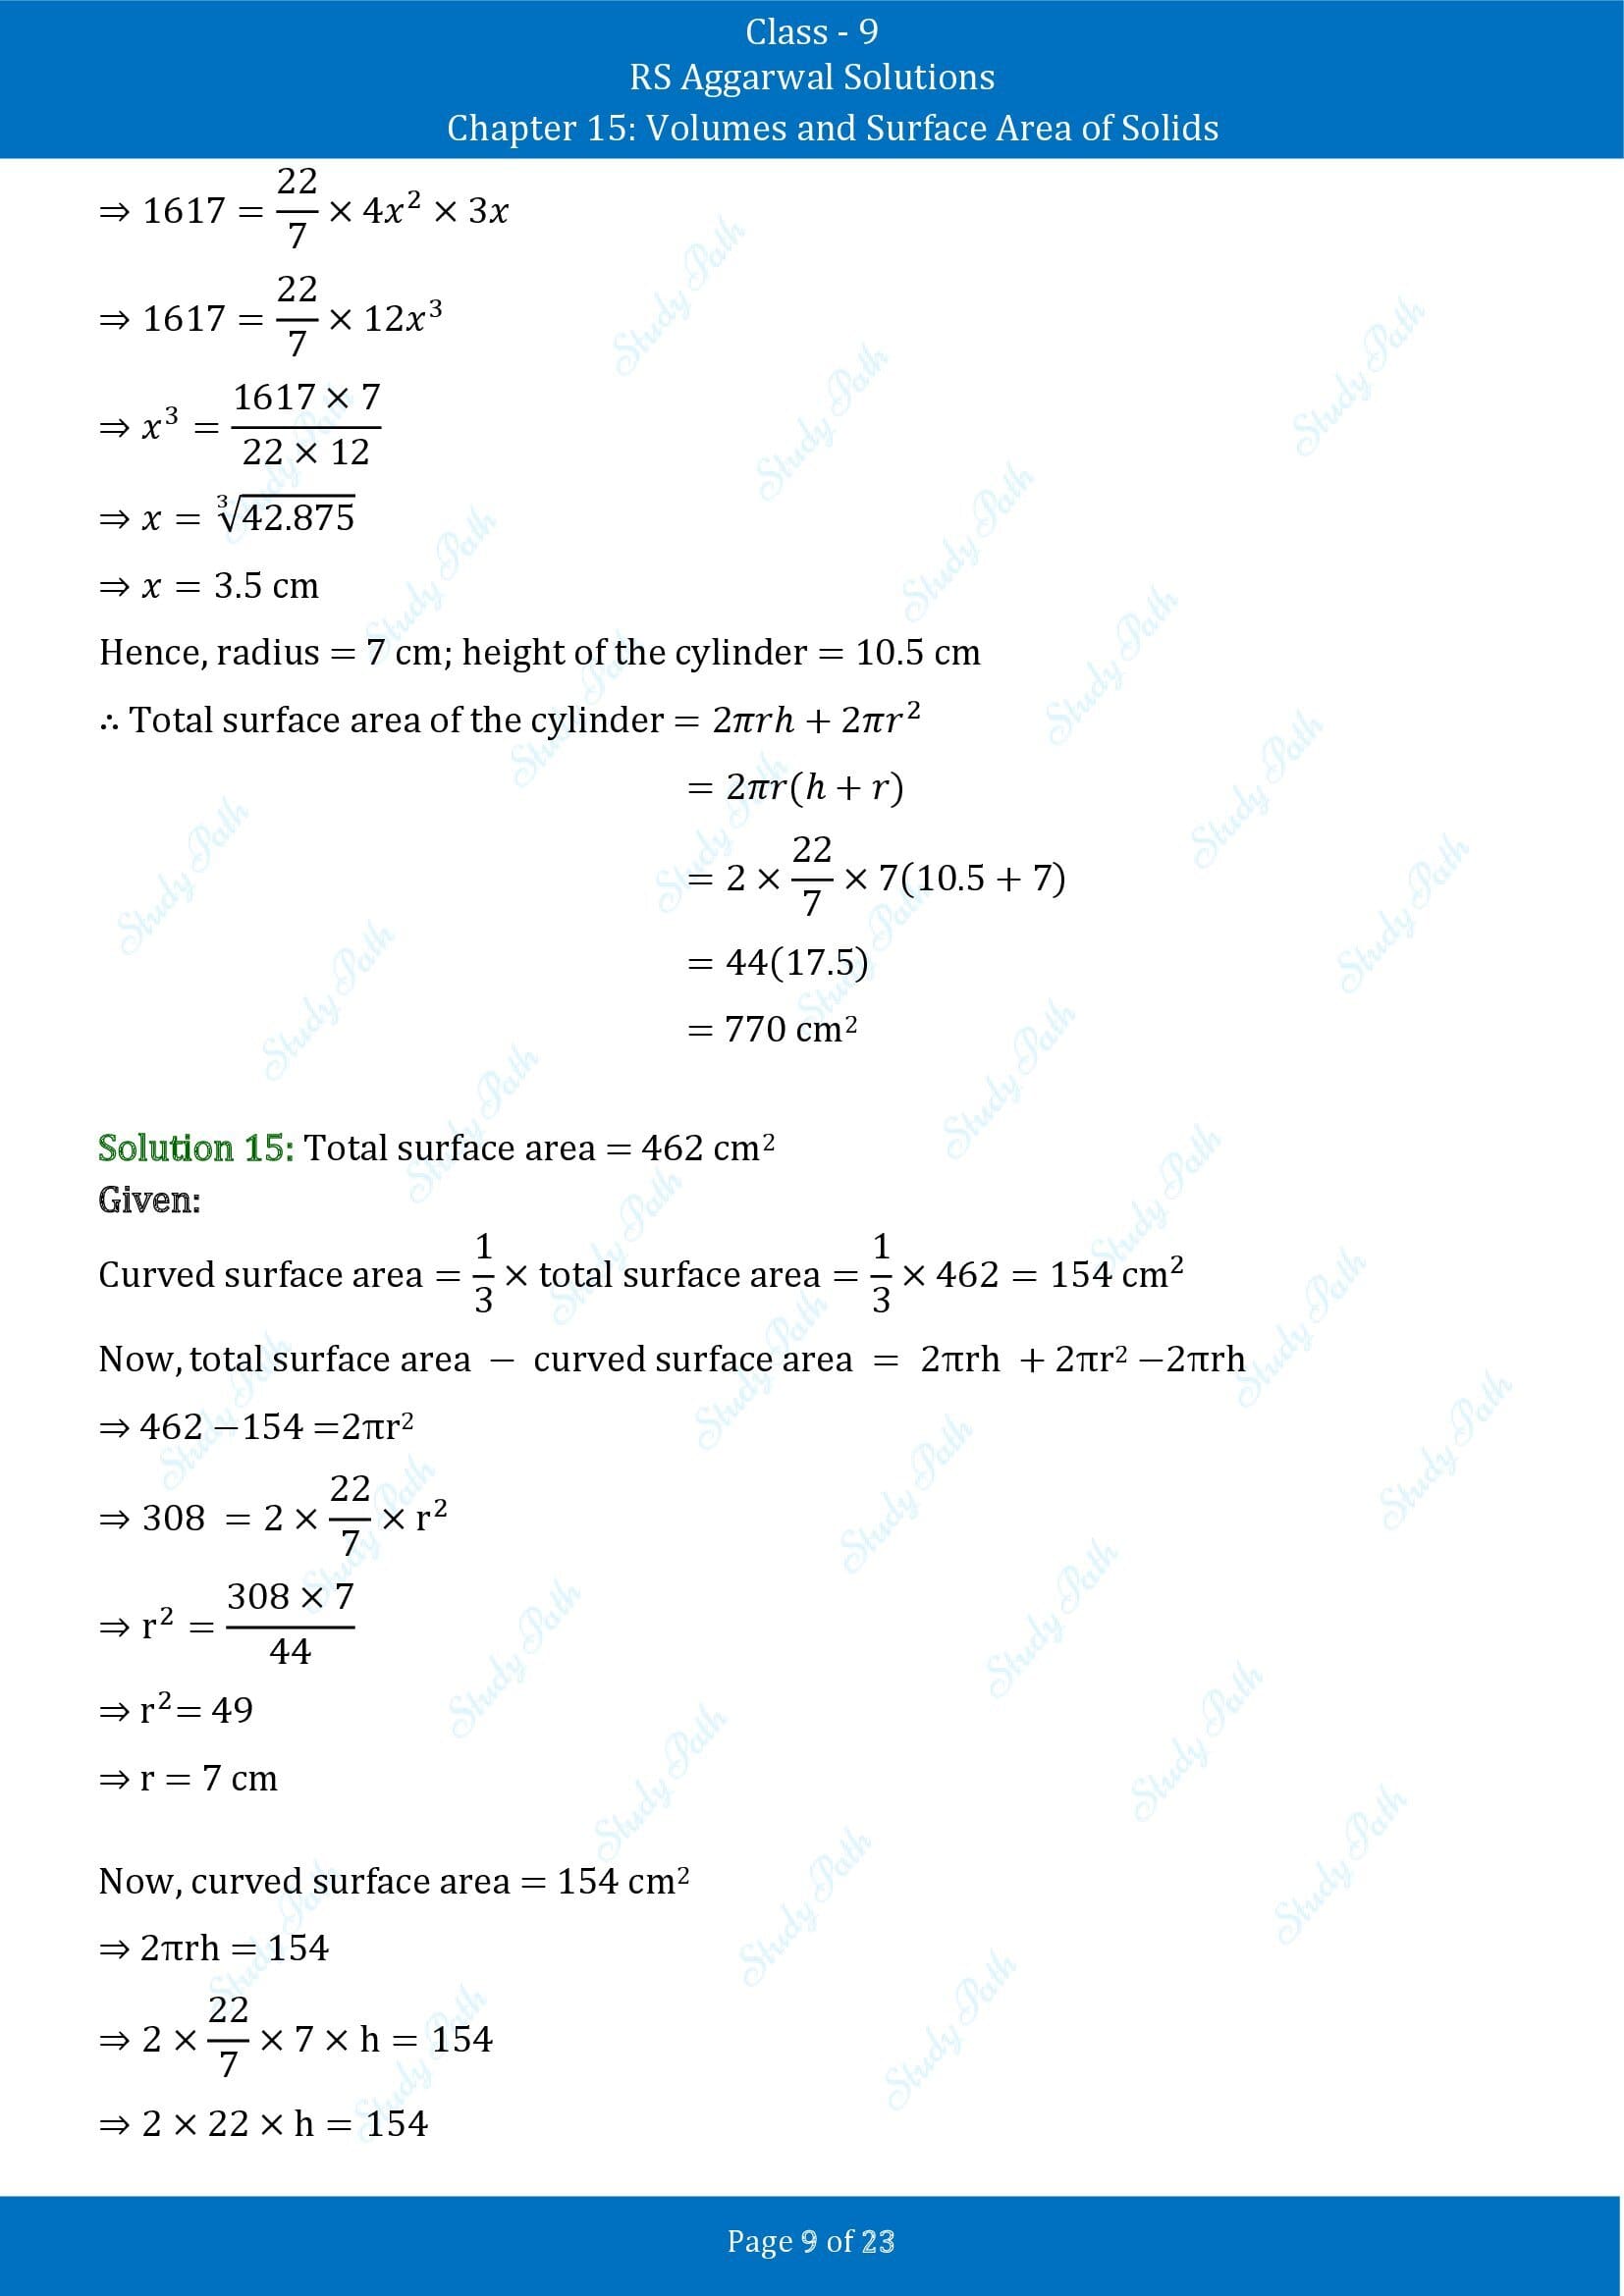 RS Aggarwal Solutions Class 9 Chapter 15 Volumes and Surface Area of Solids Exercise 15B 00009